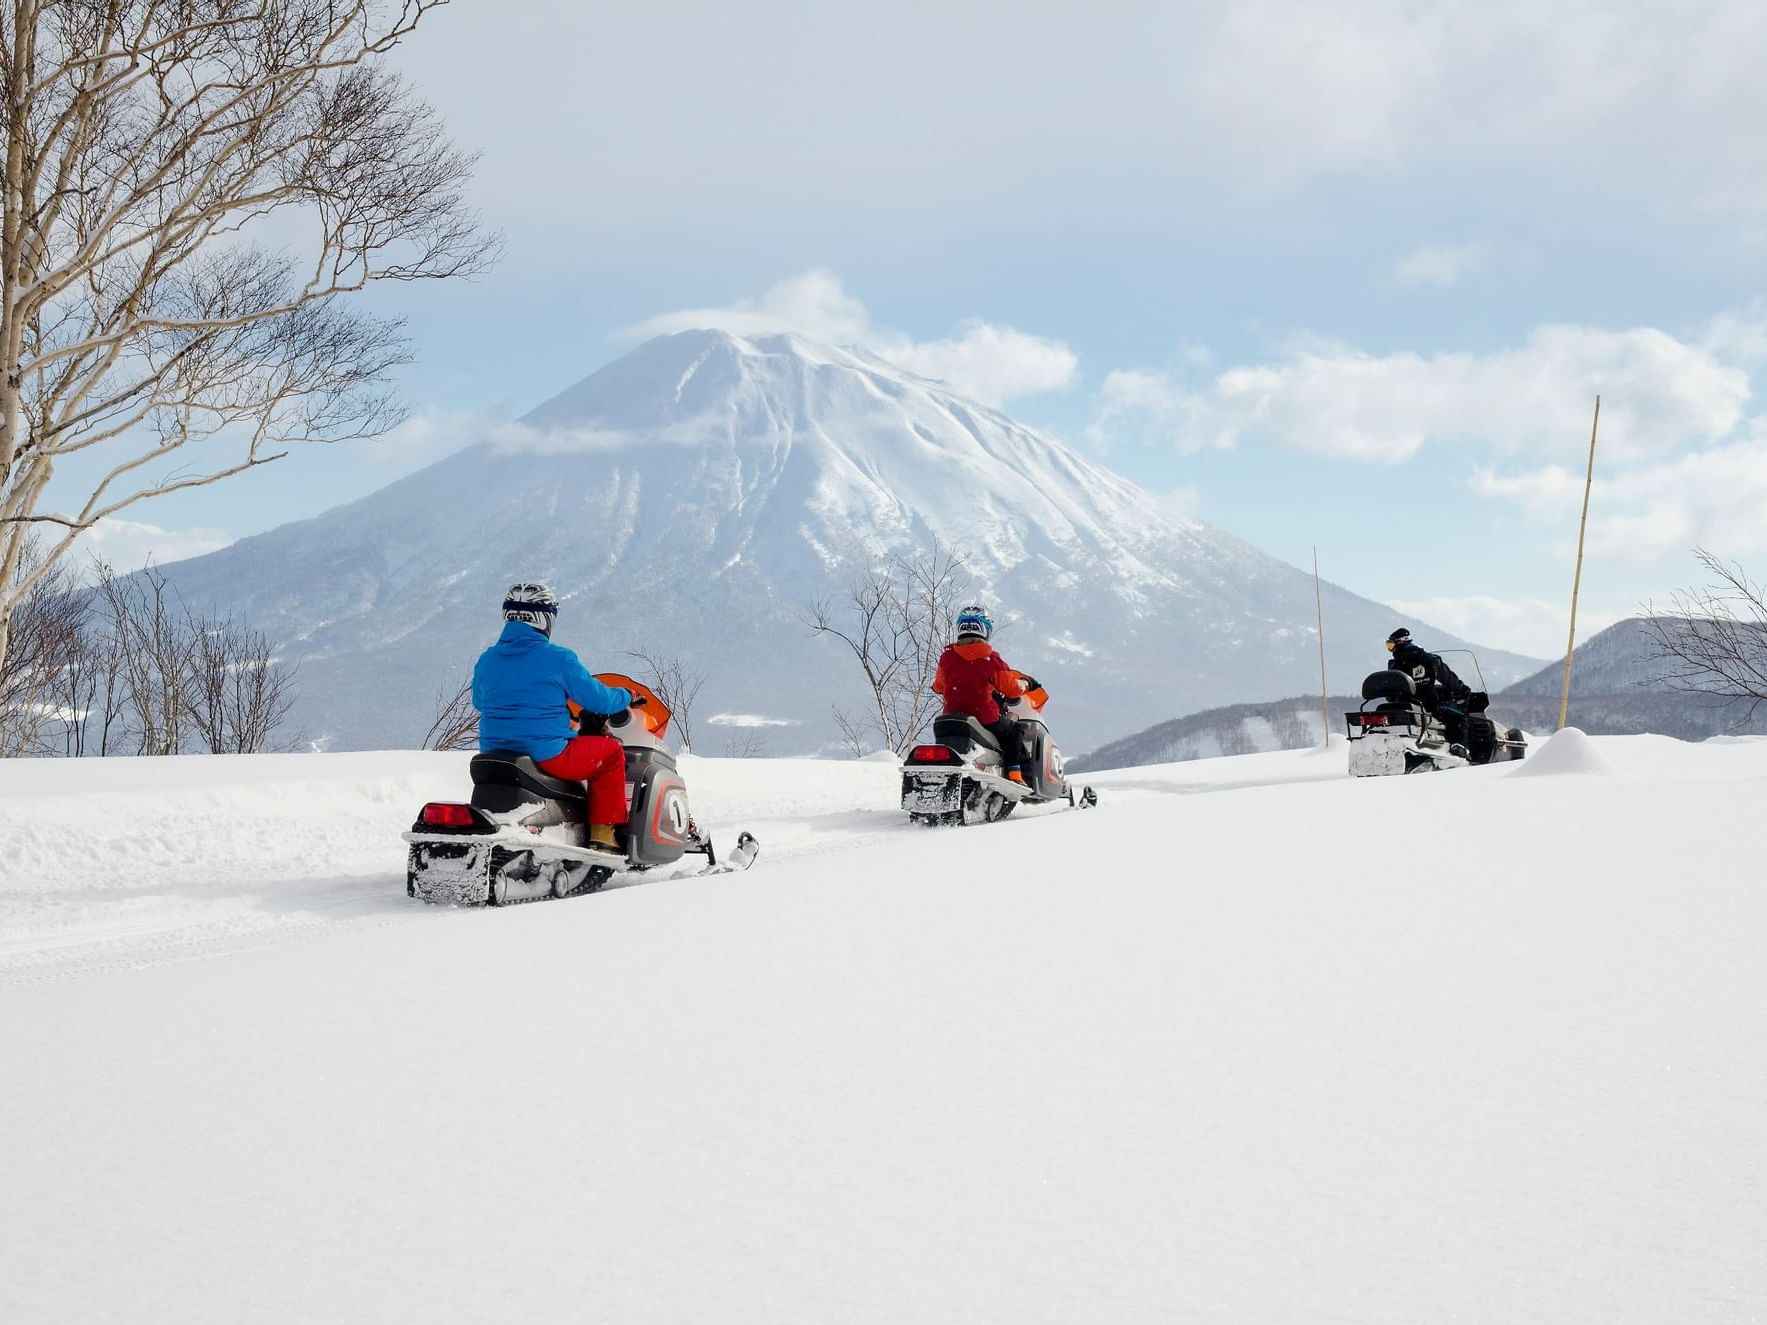 Snow Mobiling in the snow near Chatrium Niseko Japan